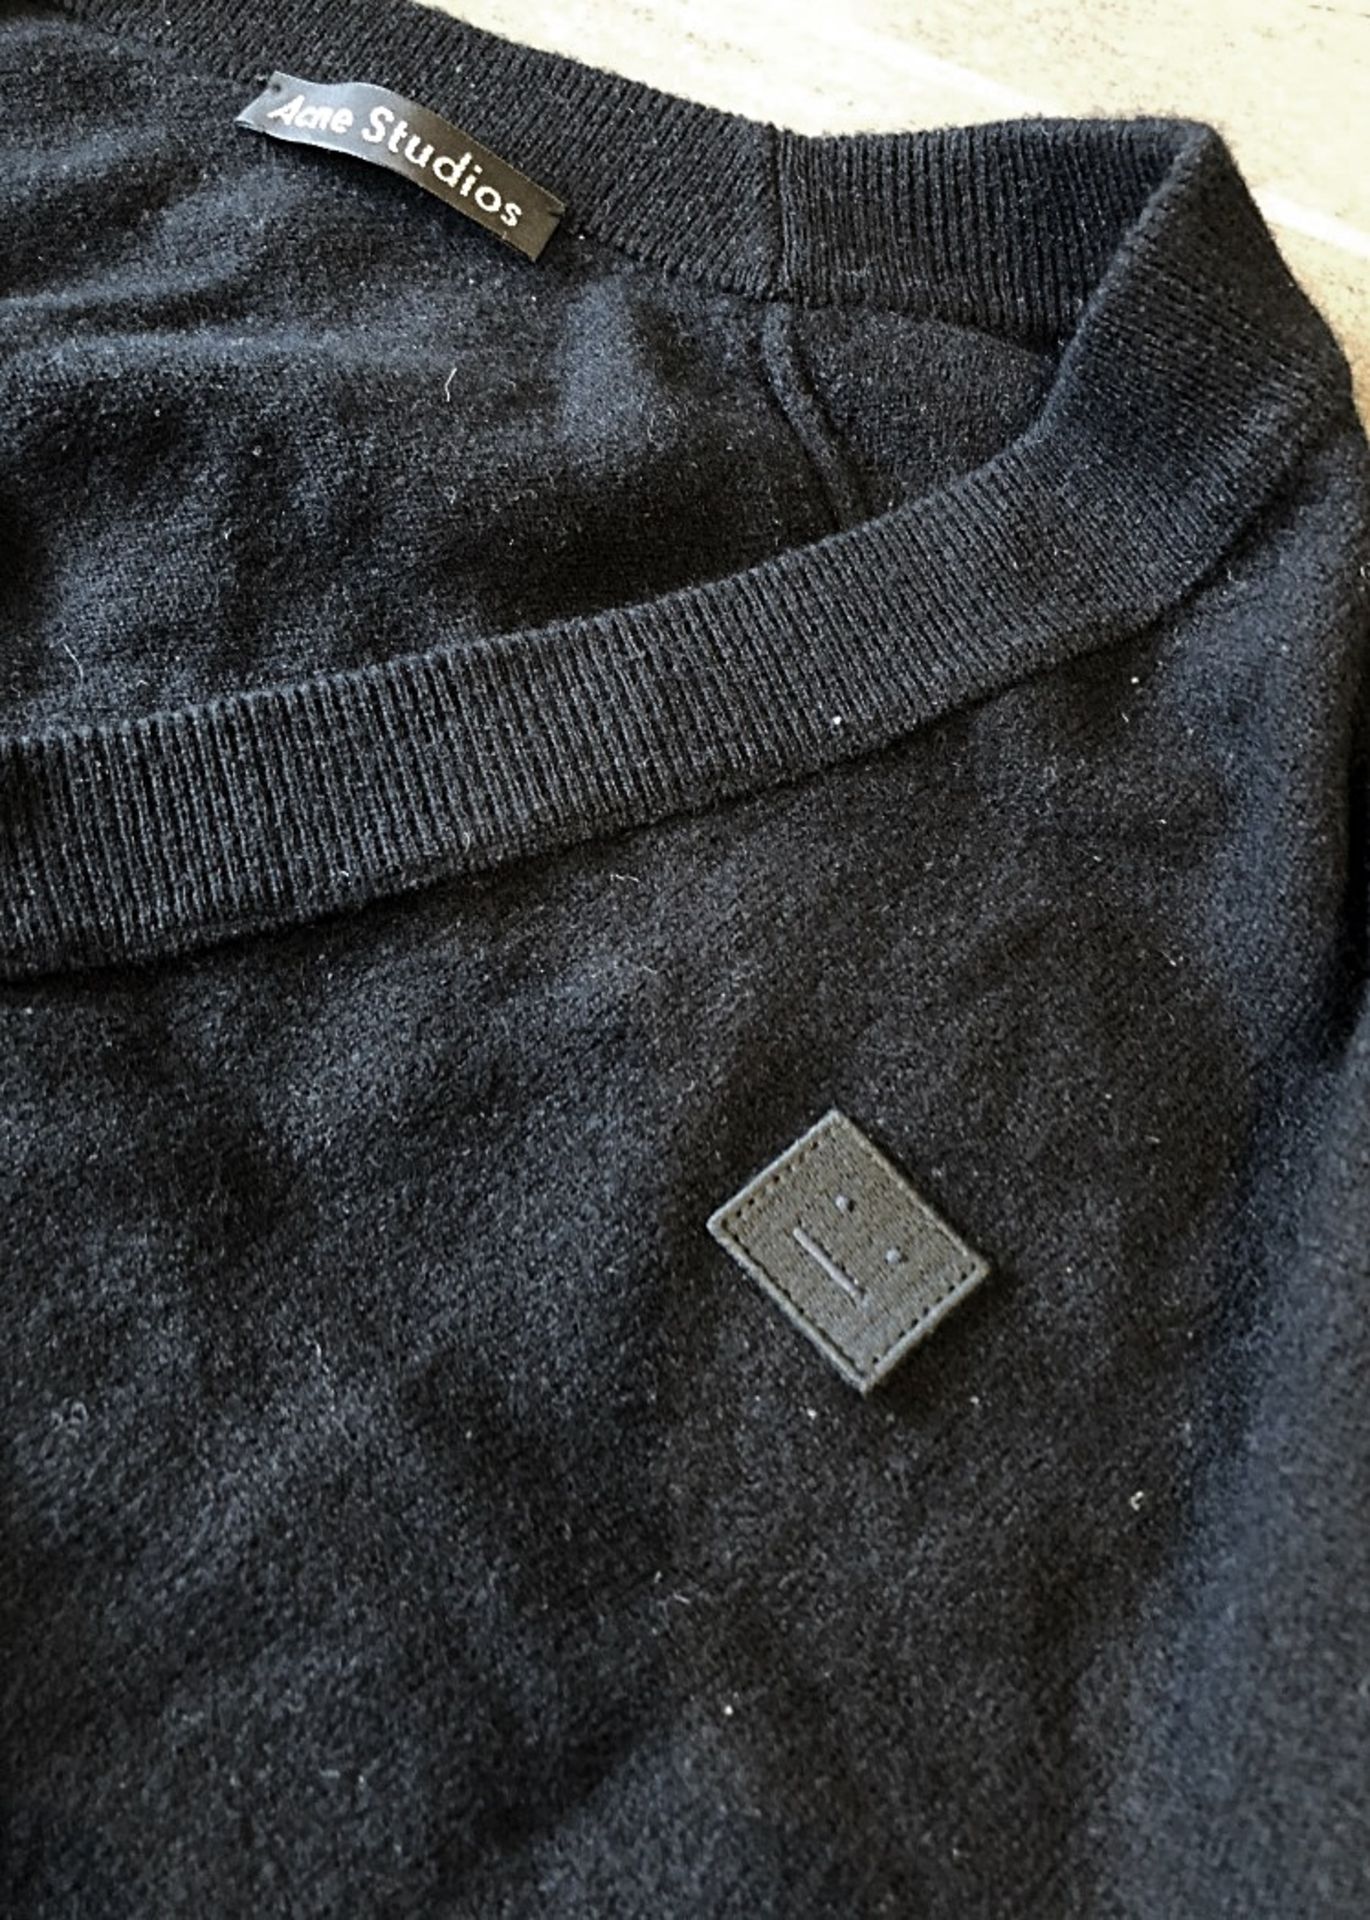 1 x Men's Genuine Acne Studios Sweater In Black - Preowned - Ref: JS193 - NO VAT ON THE HAMMER - - Image 2 of 5